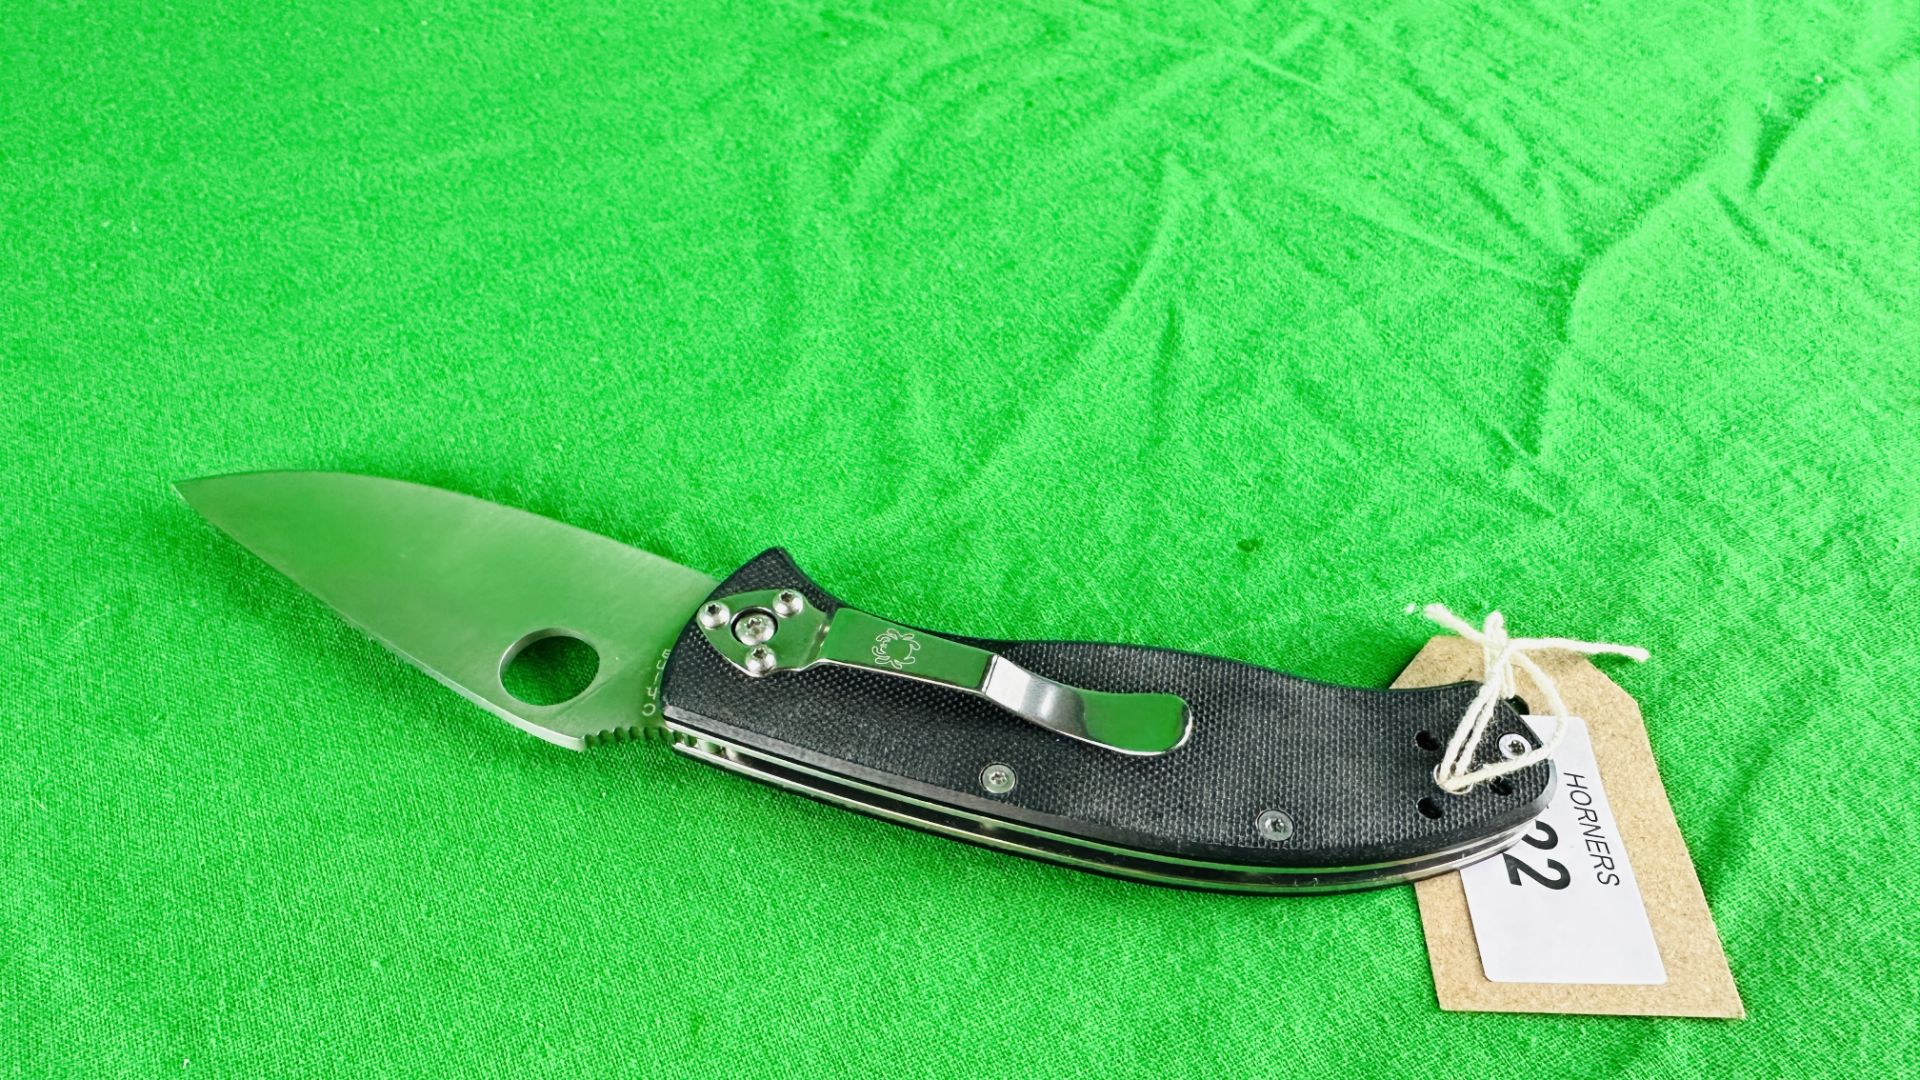 SPYDERCO TENACIOUS C122GP FOLDING POCKET LOCK KNIFE - NO POSTAGE OR PACKING AVAILABLE - Image 5 of 6